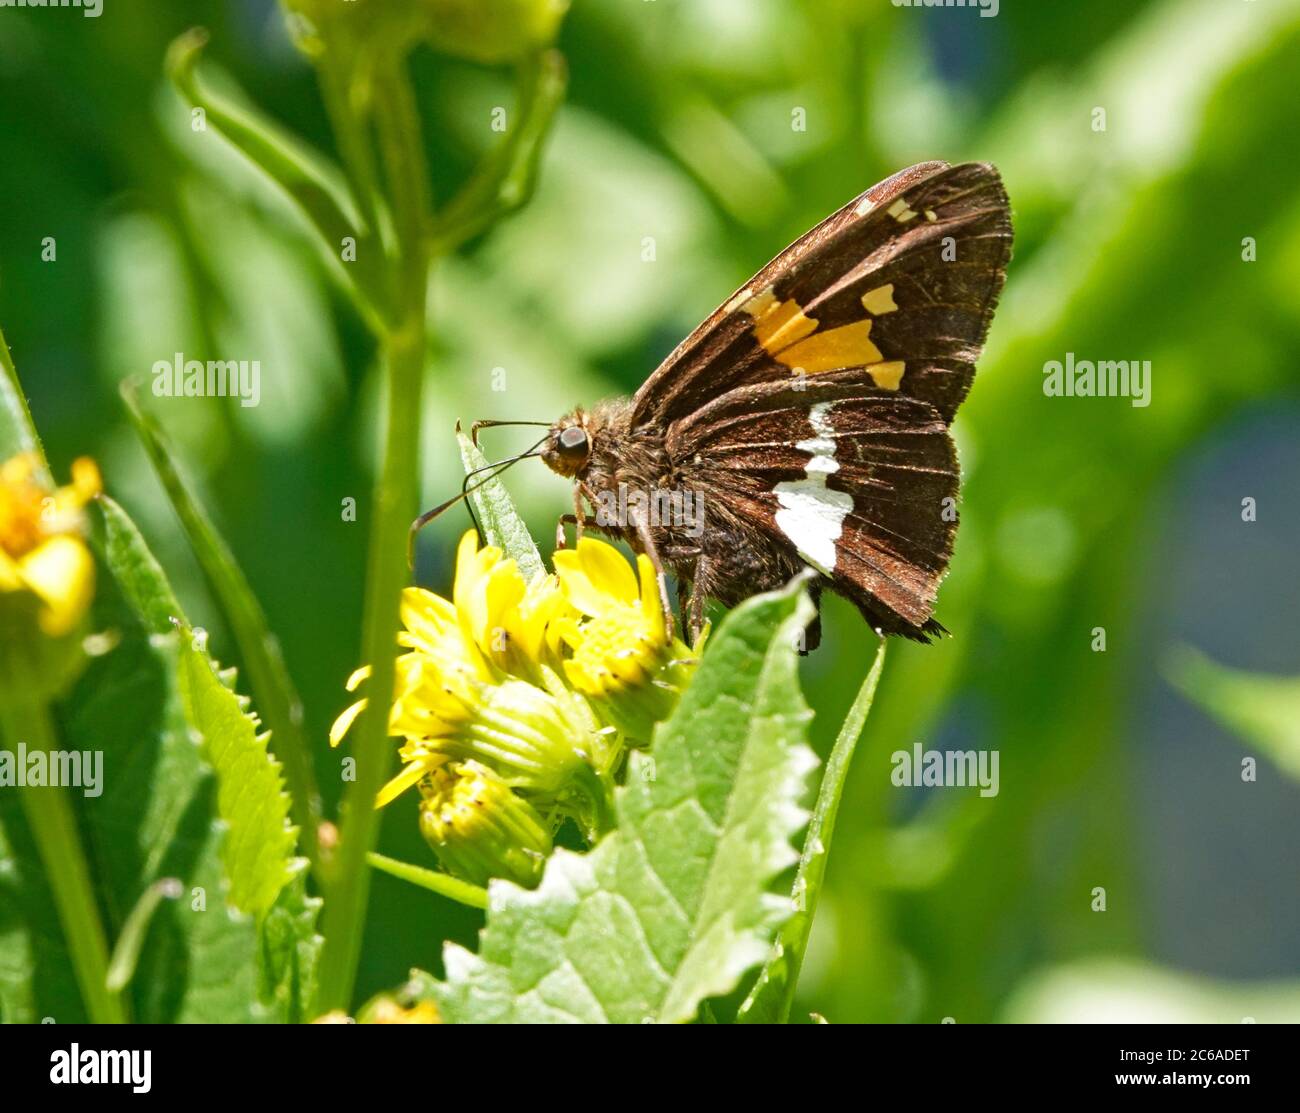 A silver spotted skipper, Epargyreus clarus, taking nectar from a Pacific Ninebark shrub, Physocarpus capitatus, on the Metolius River in Central Oreg Stock Photo